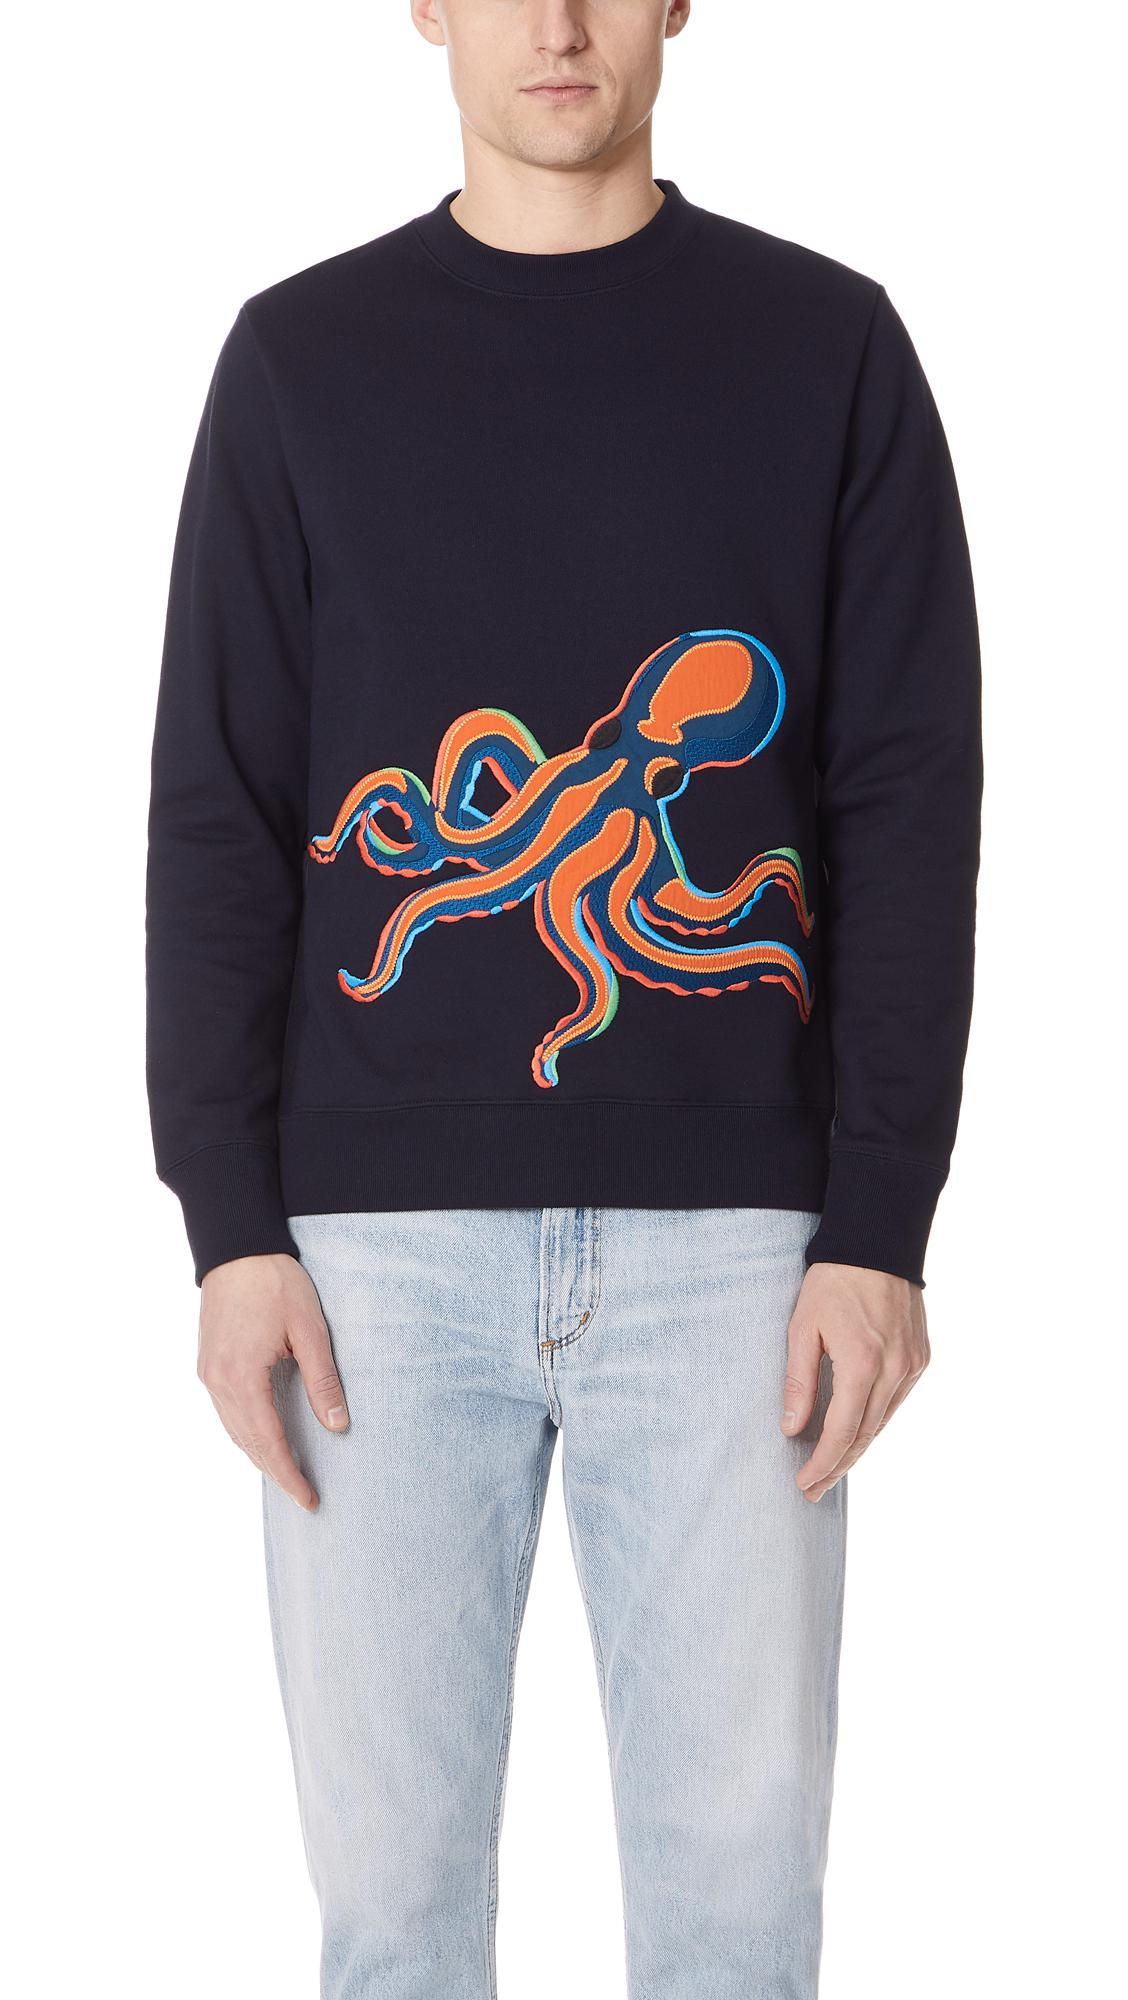 PS by Paul Smith Cotton Octopus Sweatshirt in Navy (Blue) for Men - Lyst